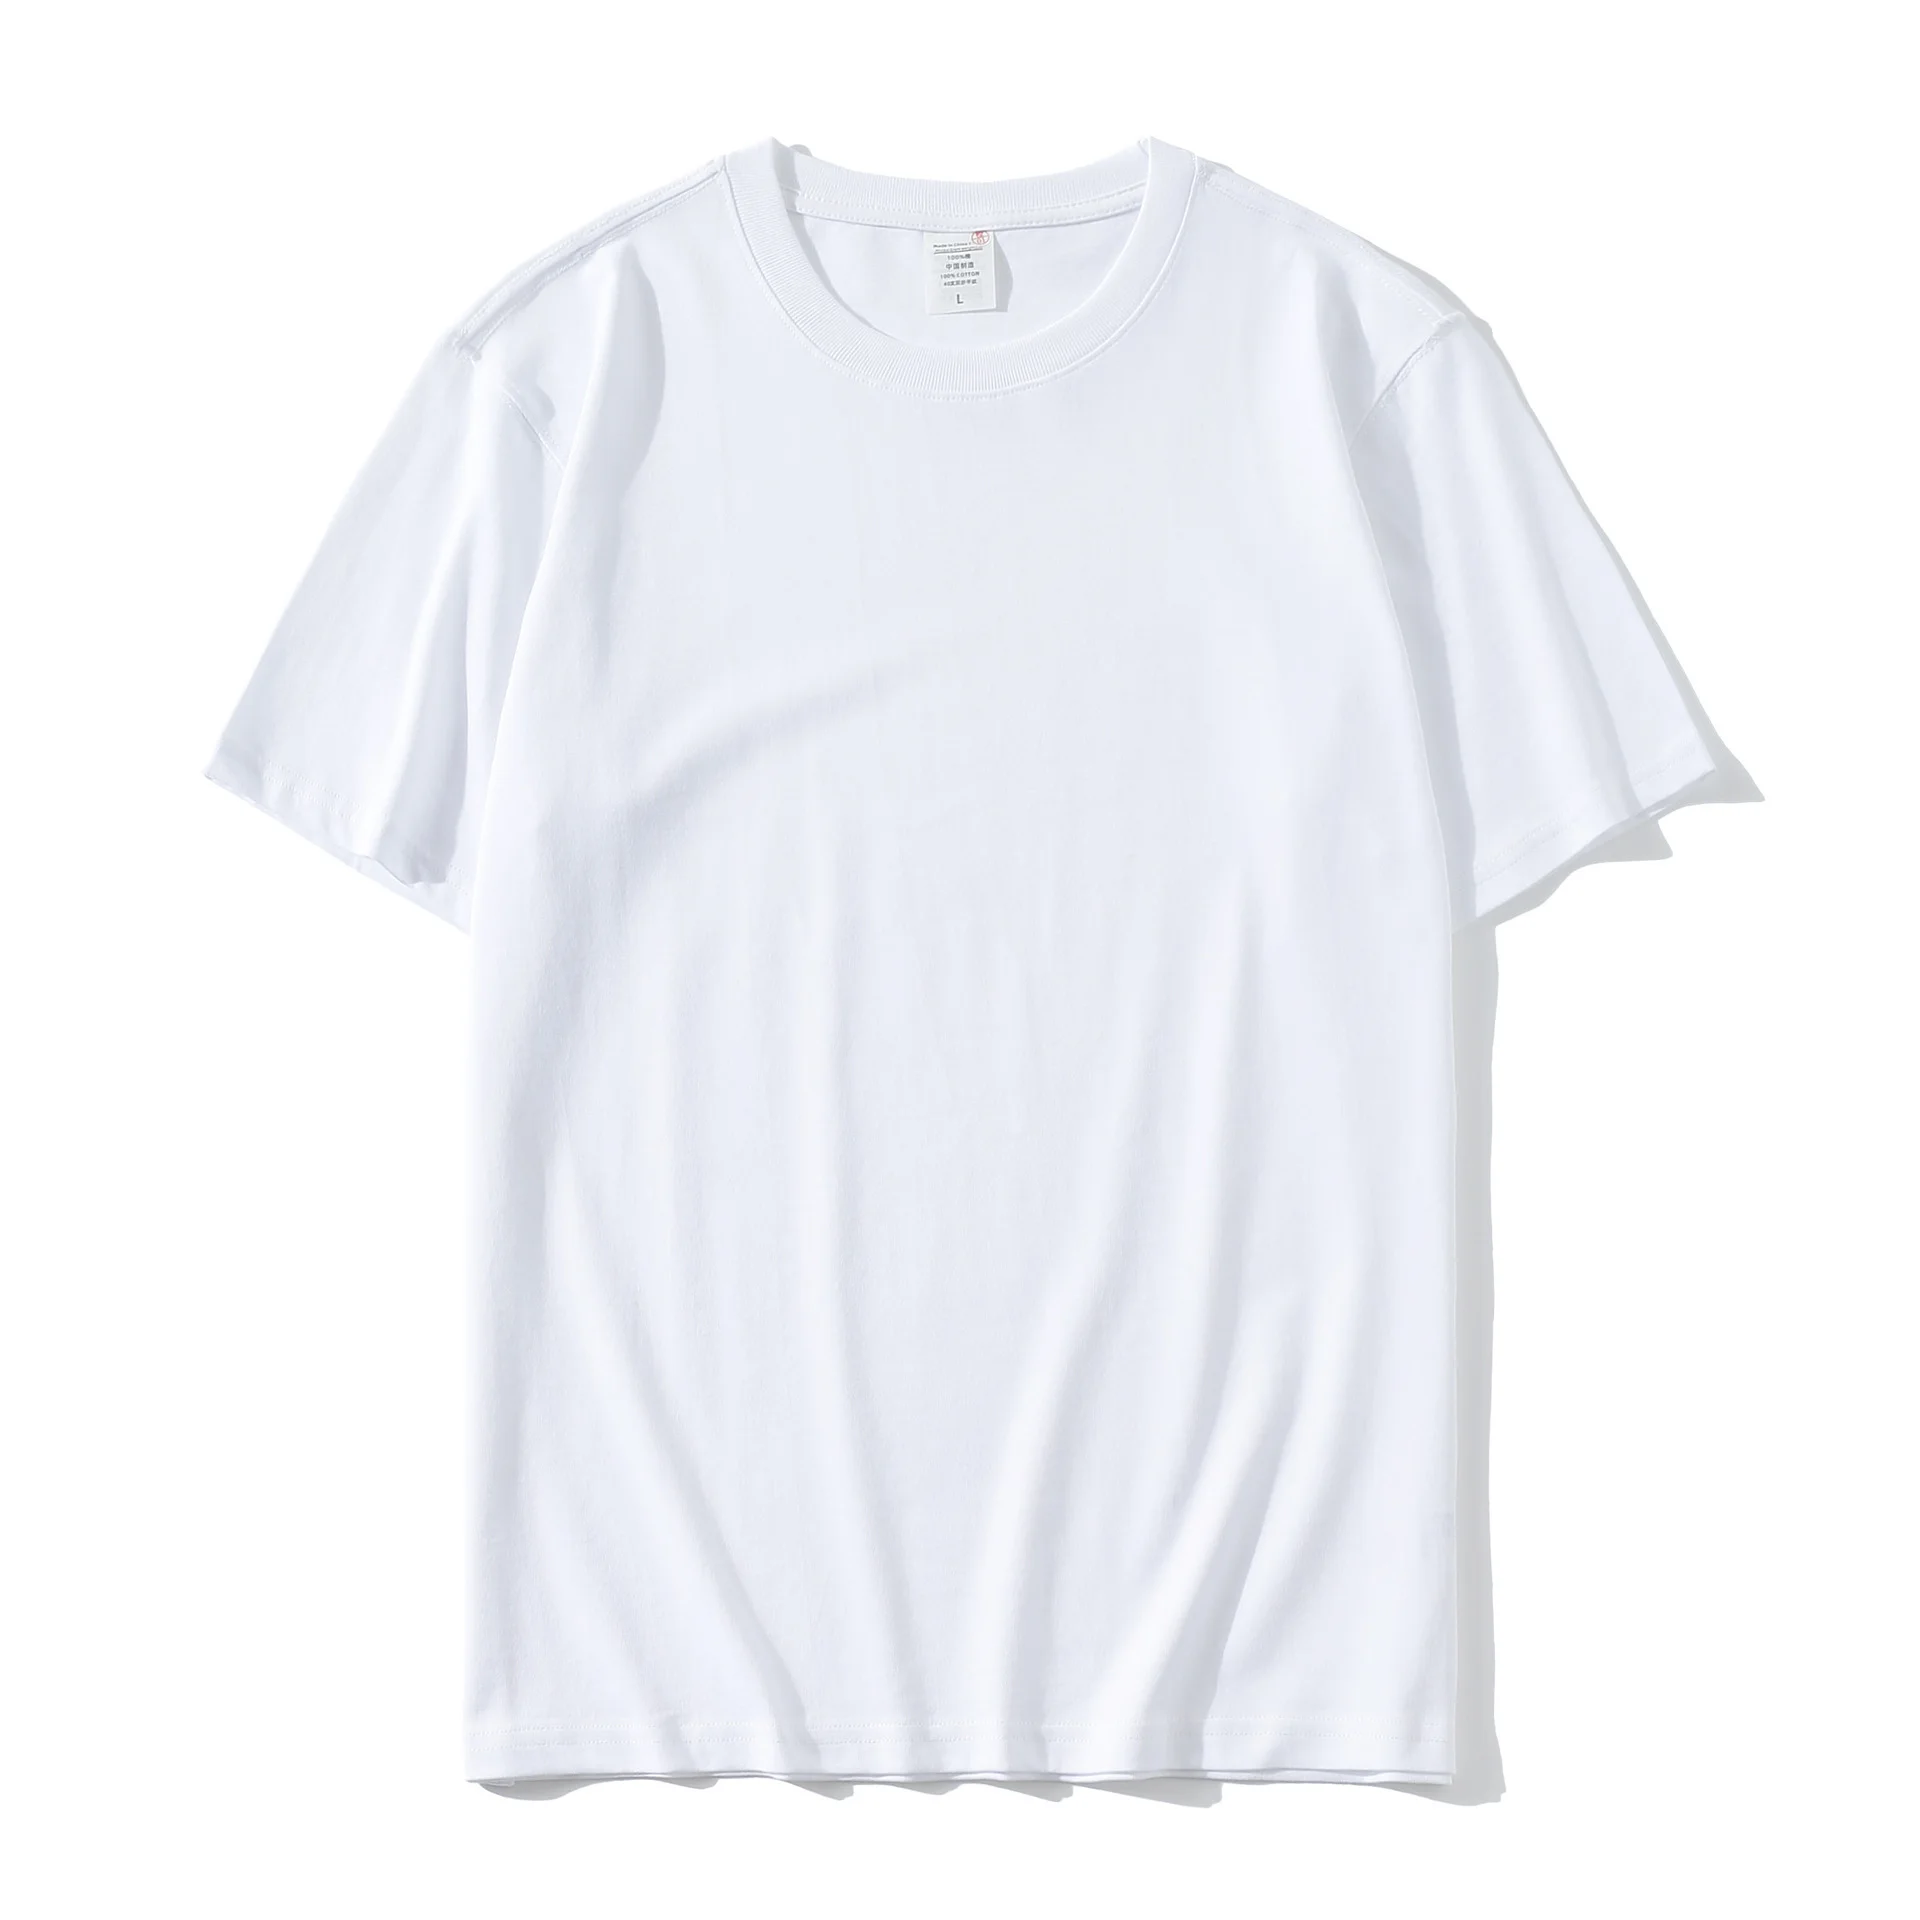 Wholesale Blank T shirts for Printing in Greensboro